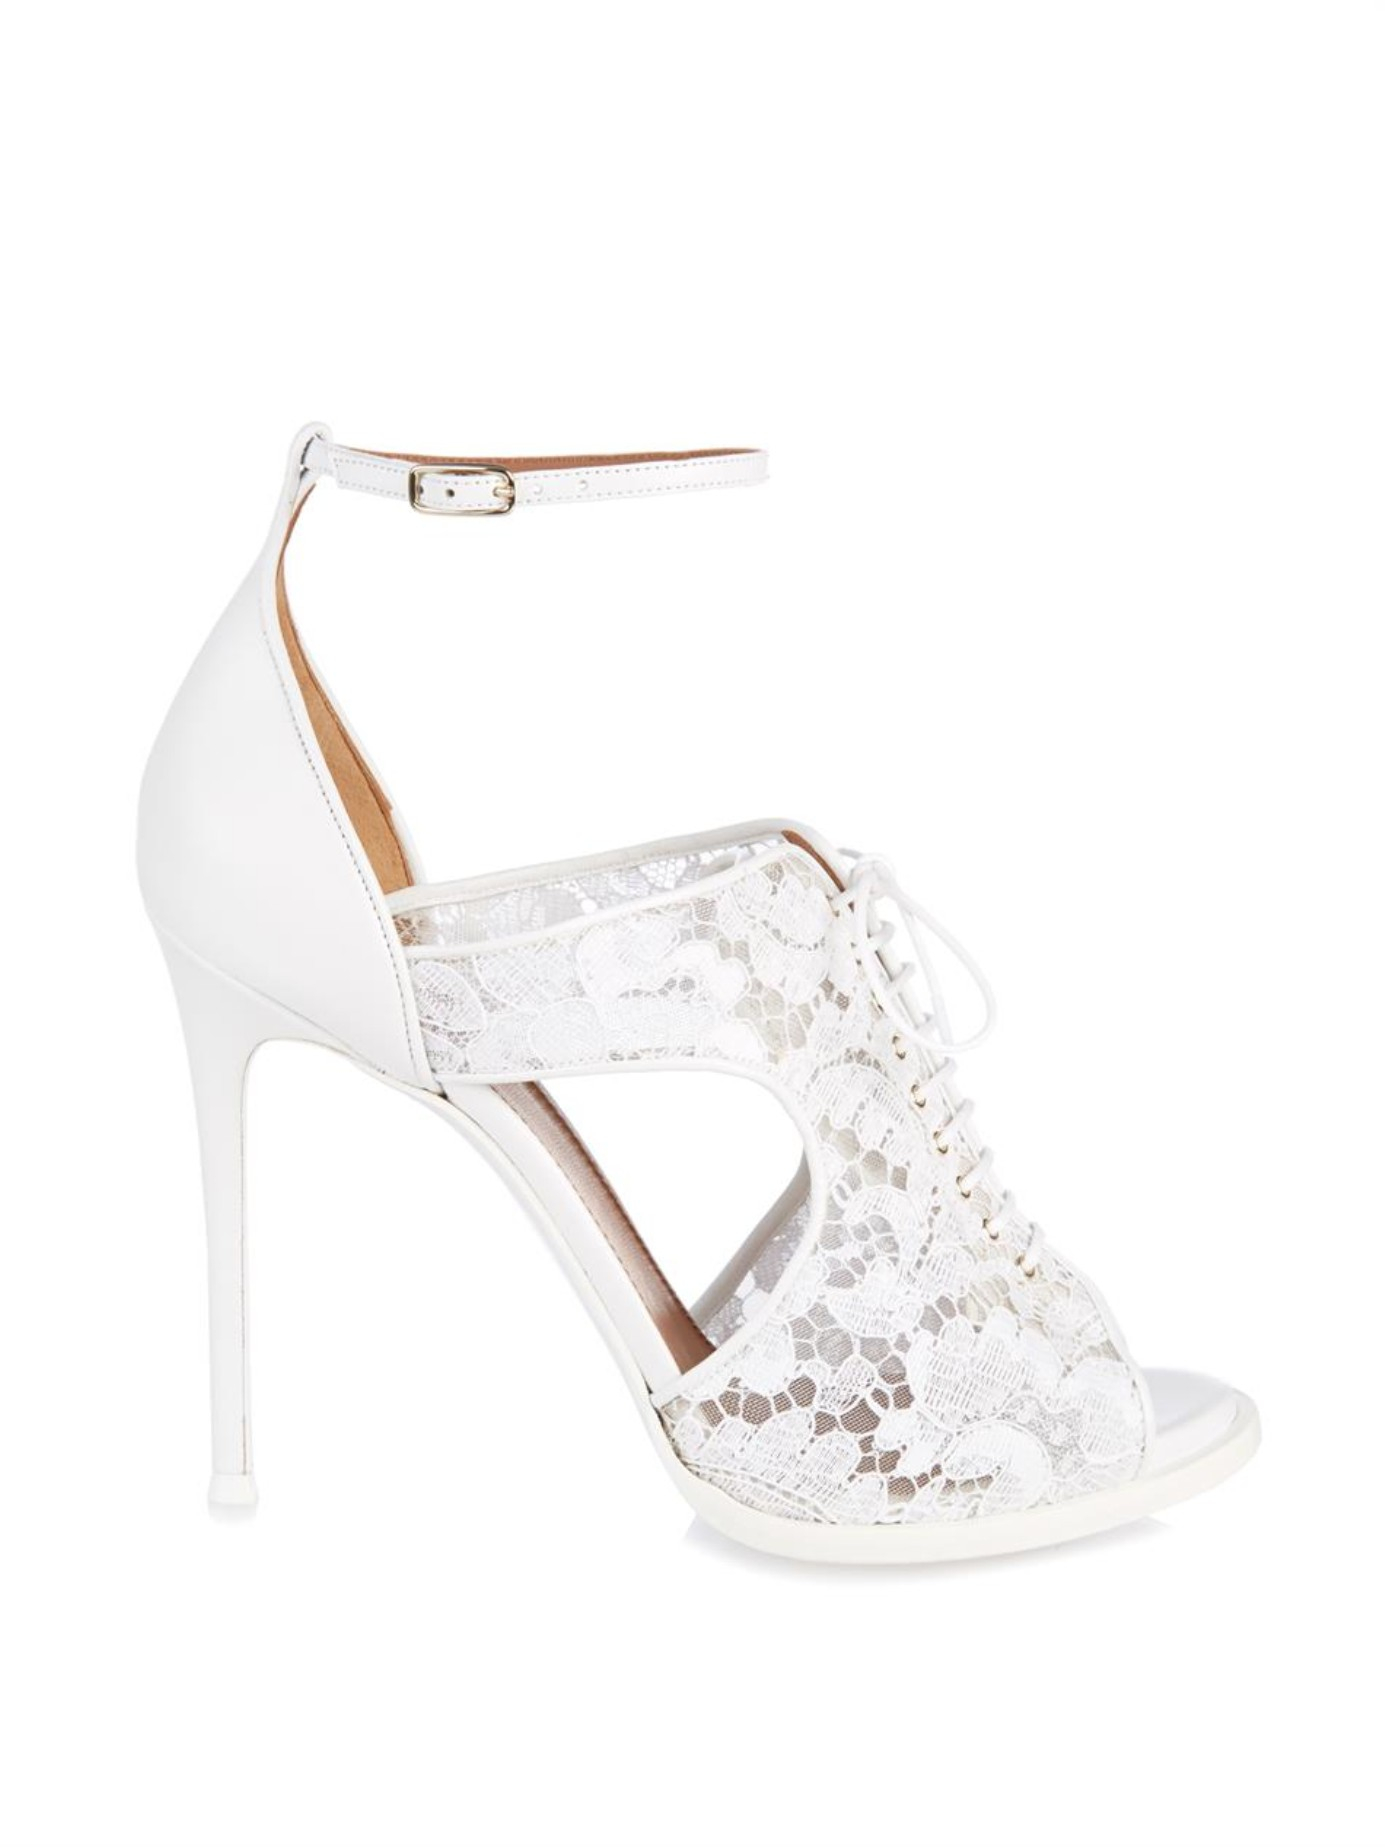 Givenchy Lace Sandals in White - Lyst